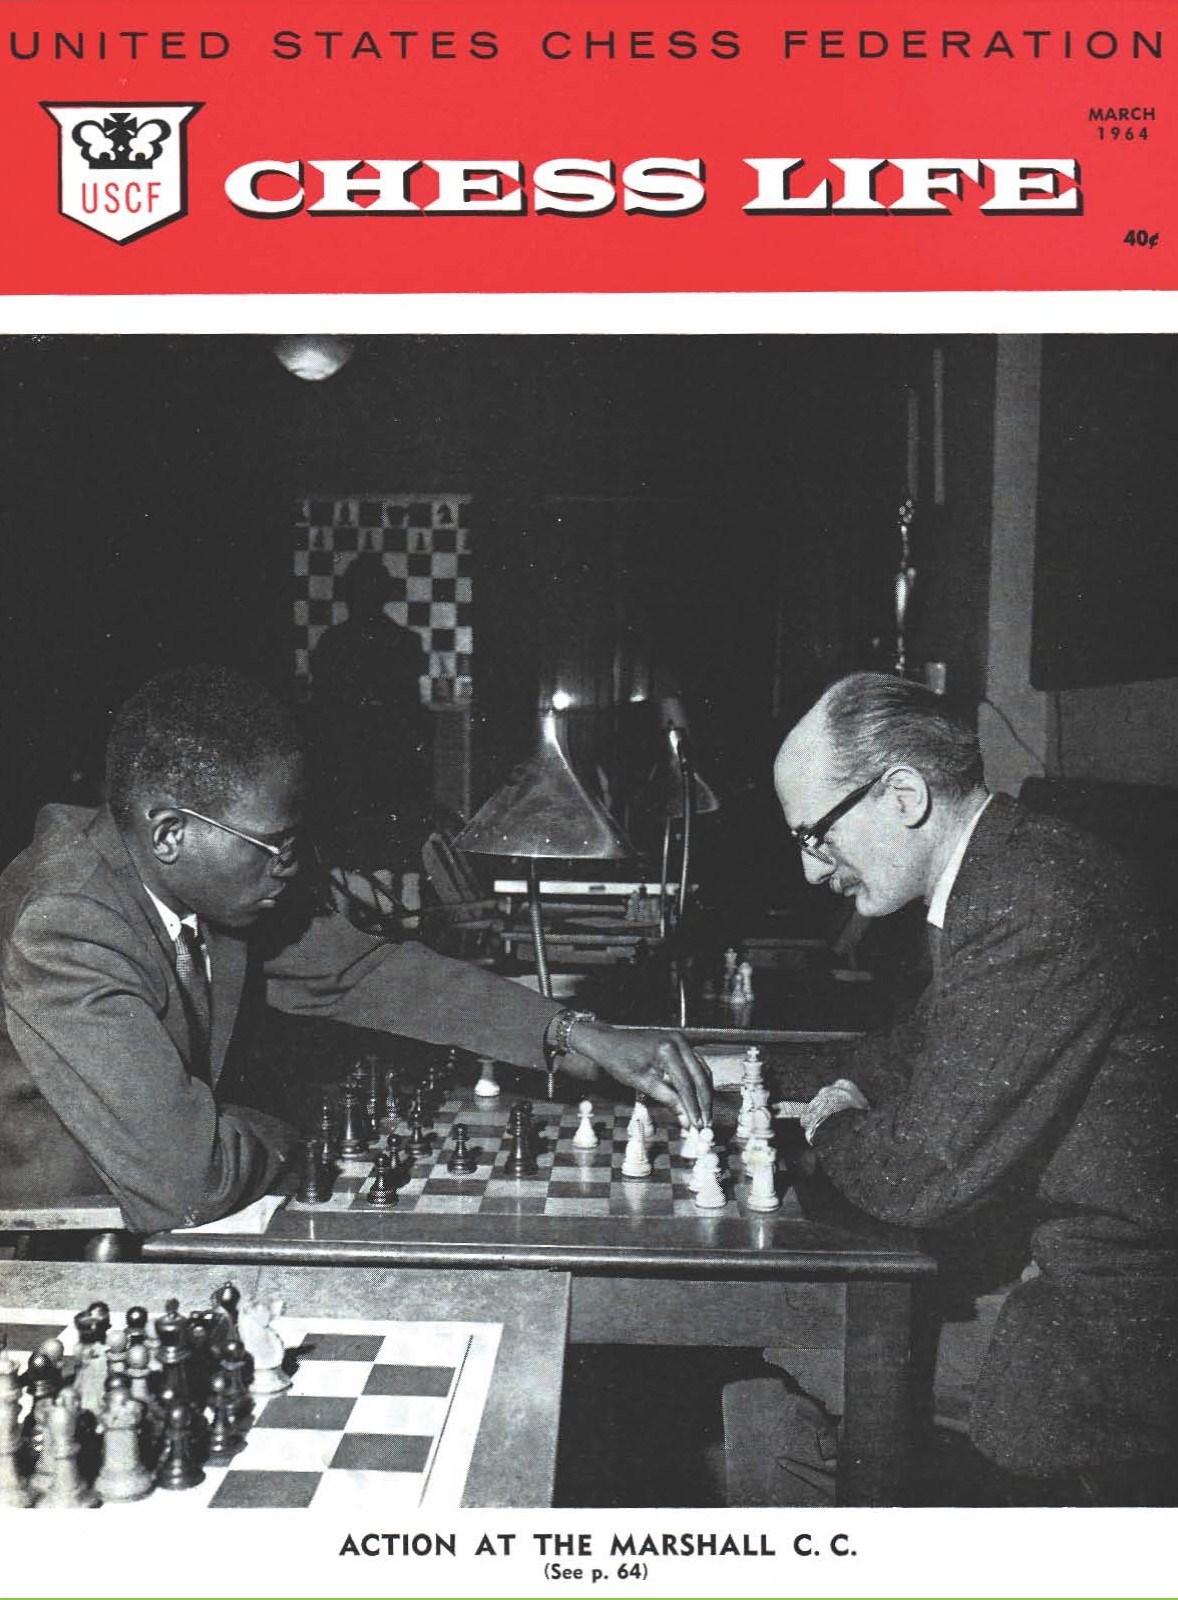 Walter Harris, 1st African-American National Master